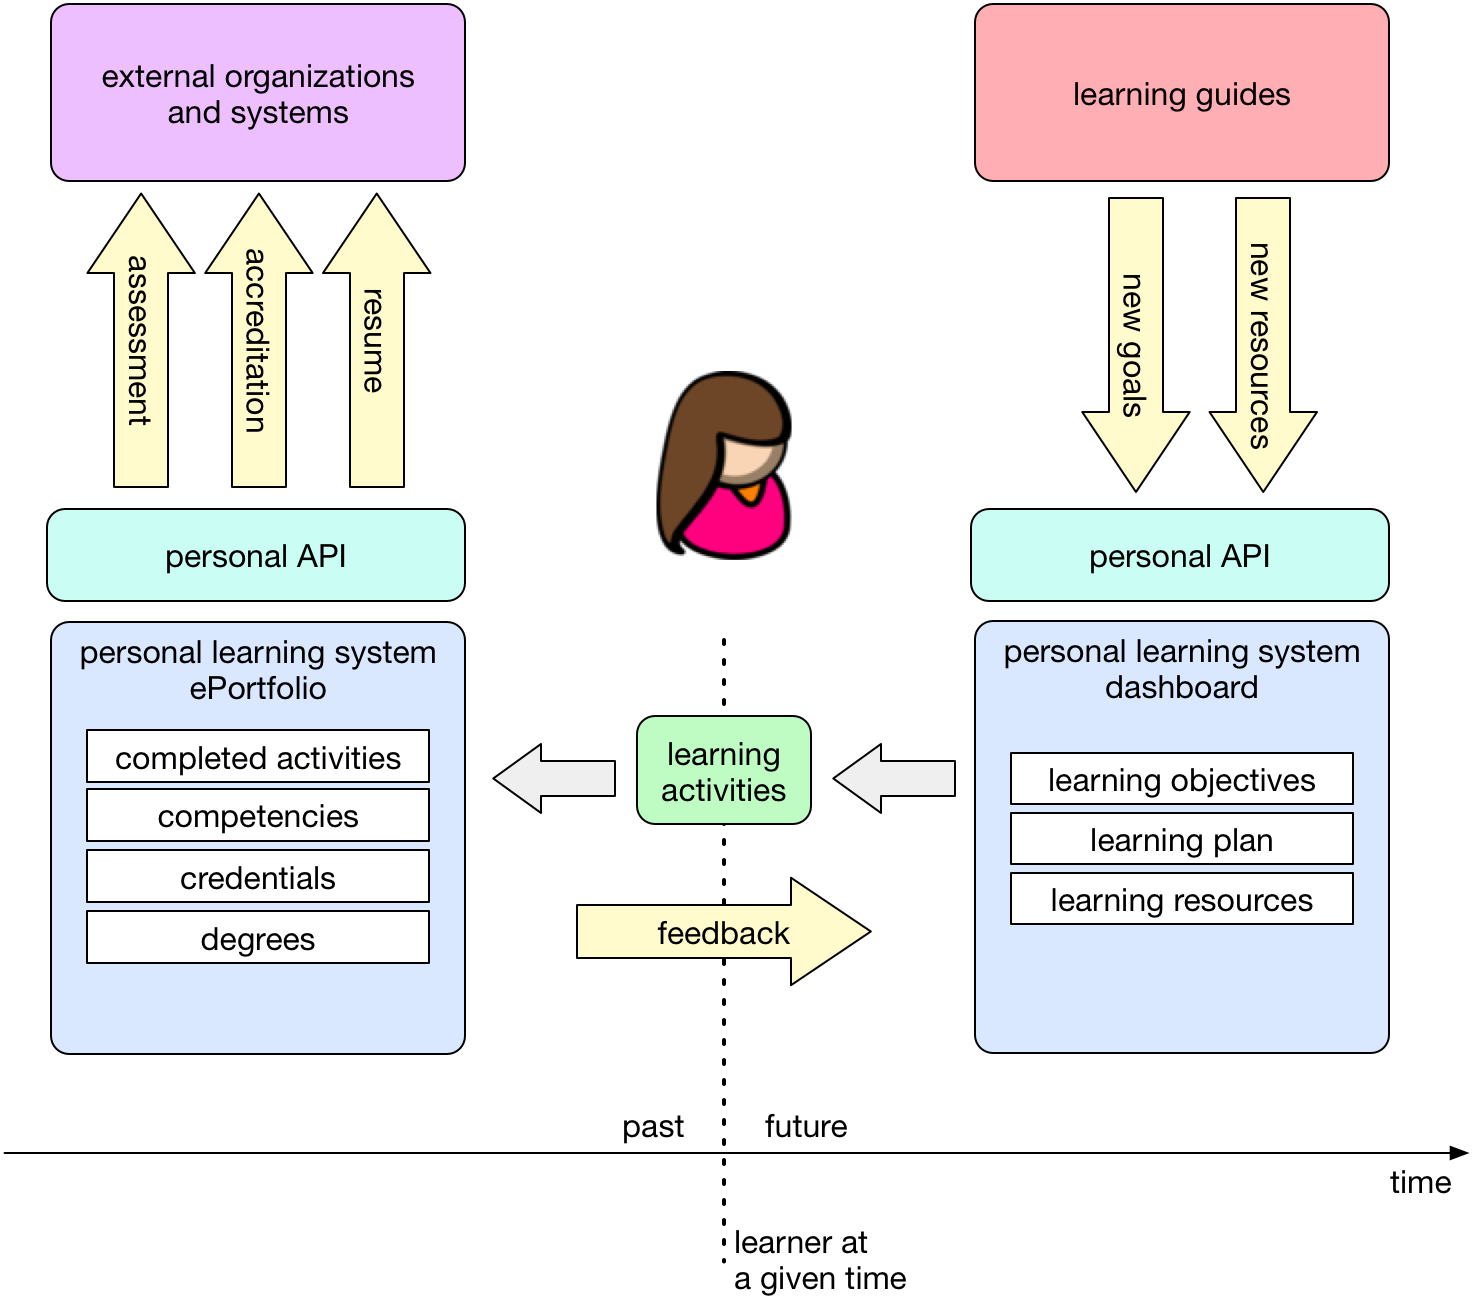 personal learning system